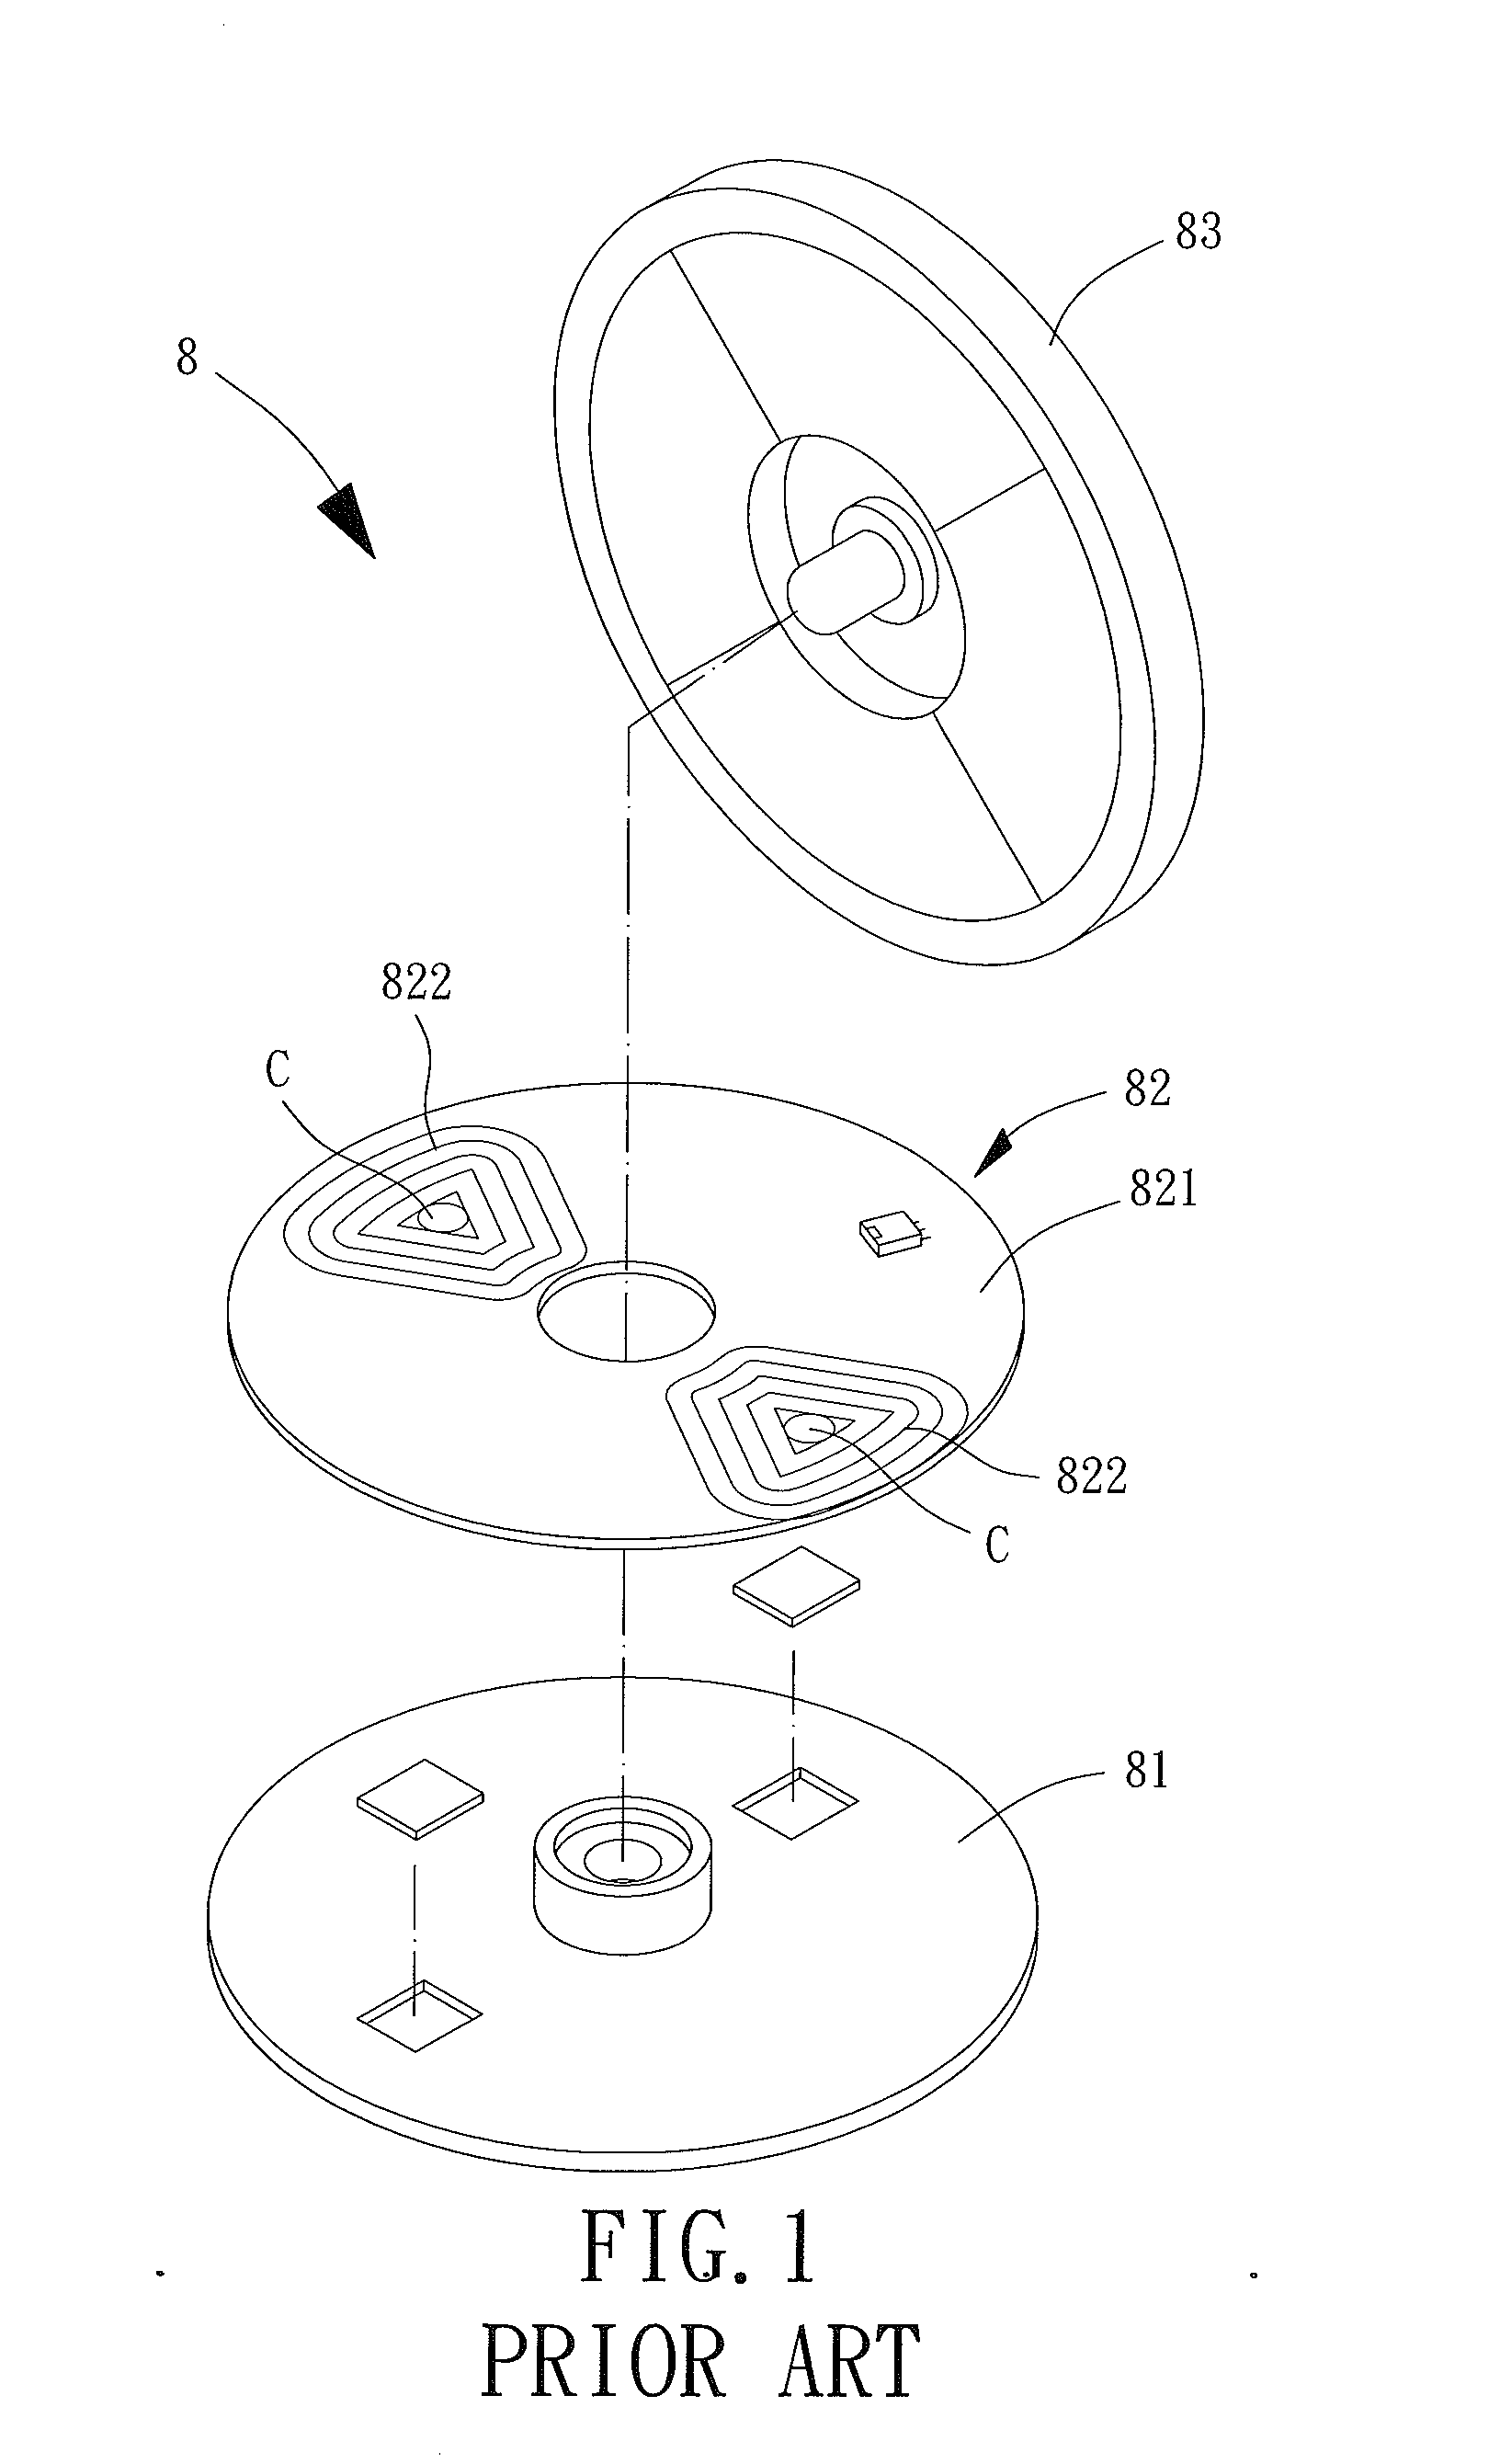 Motor Winding Structure